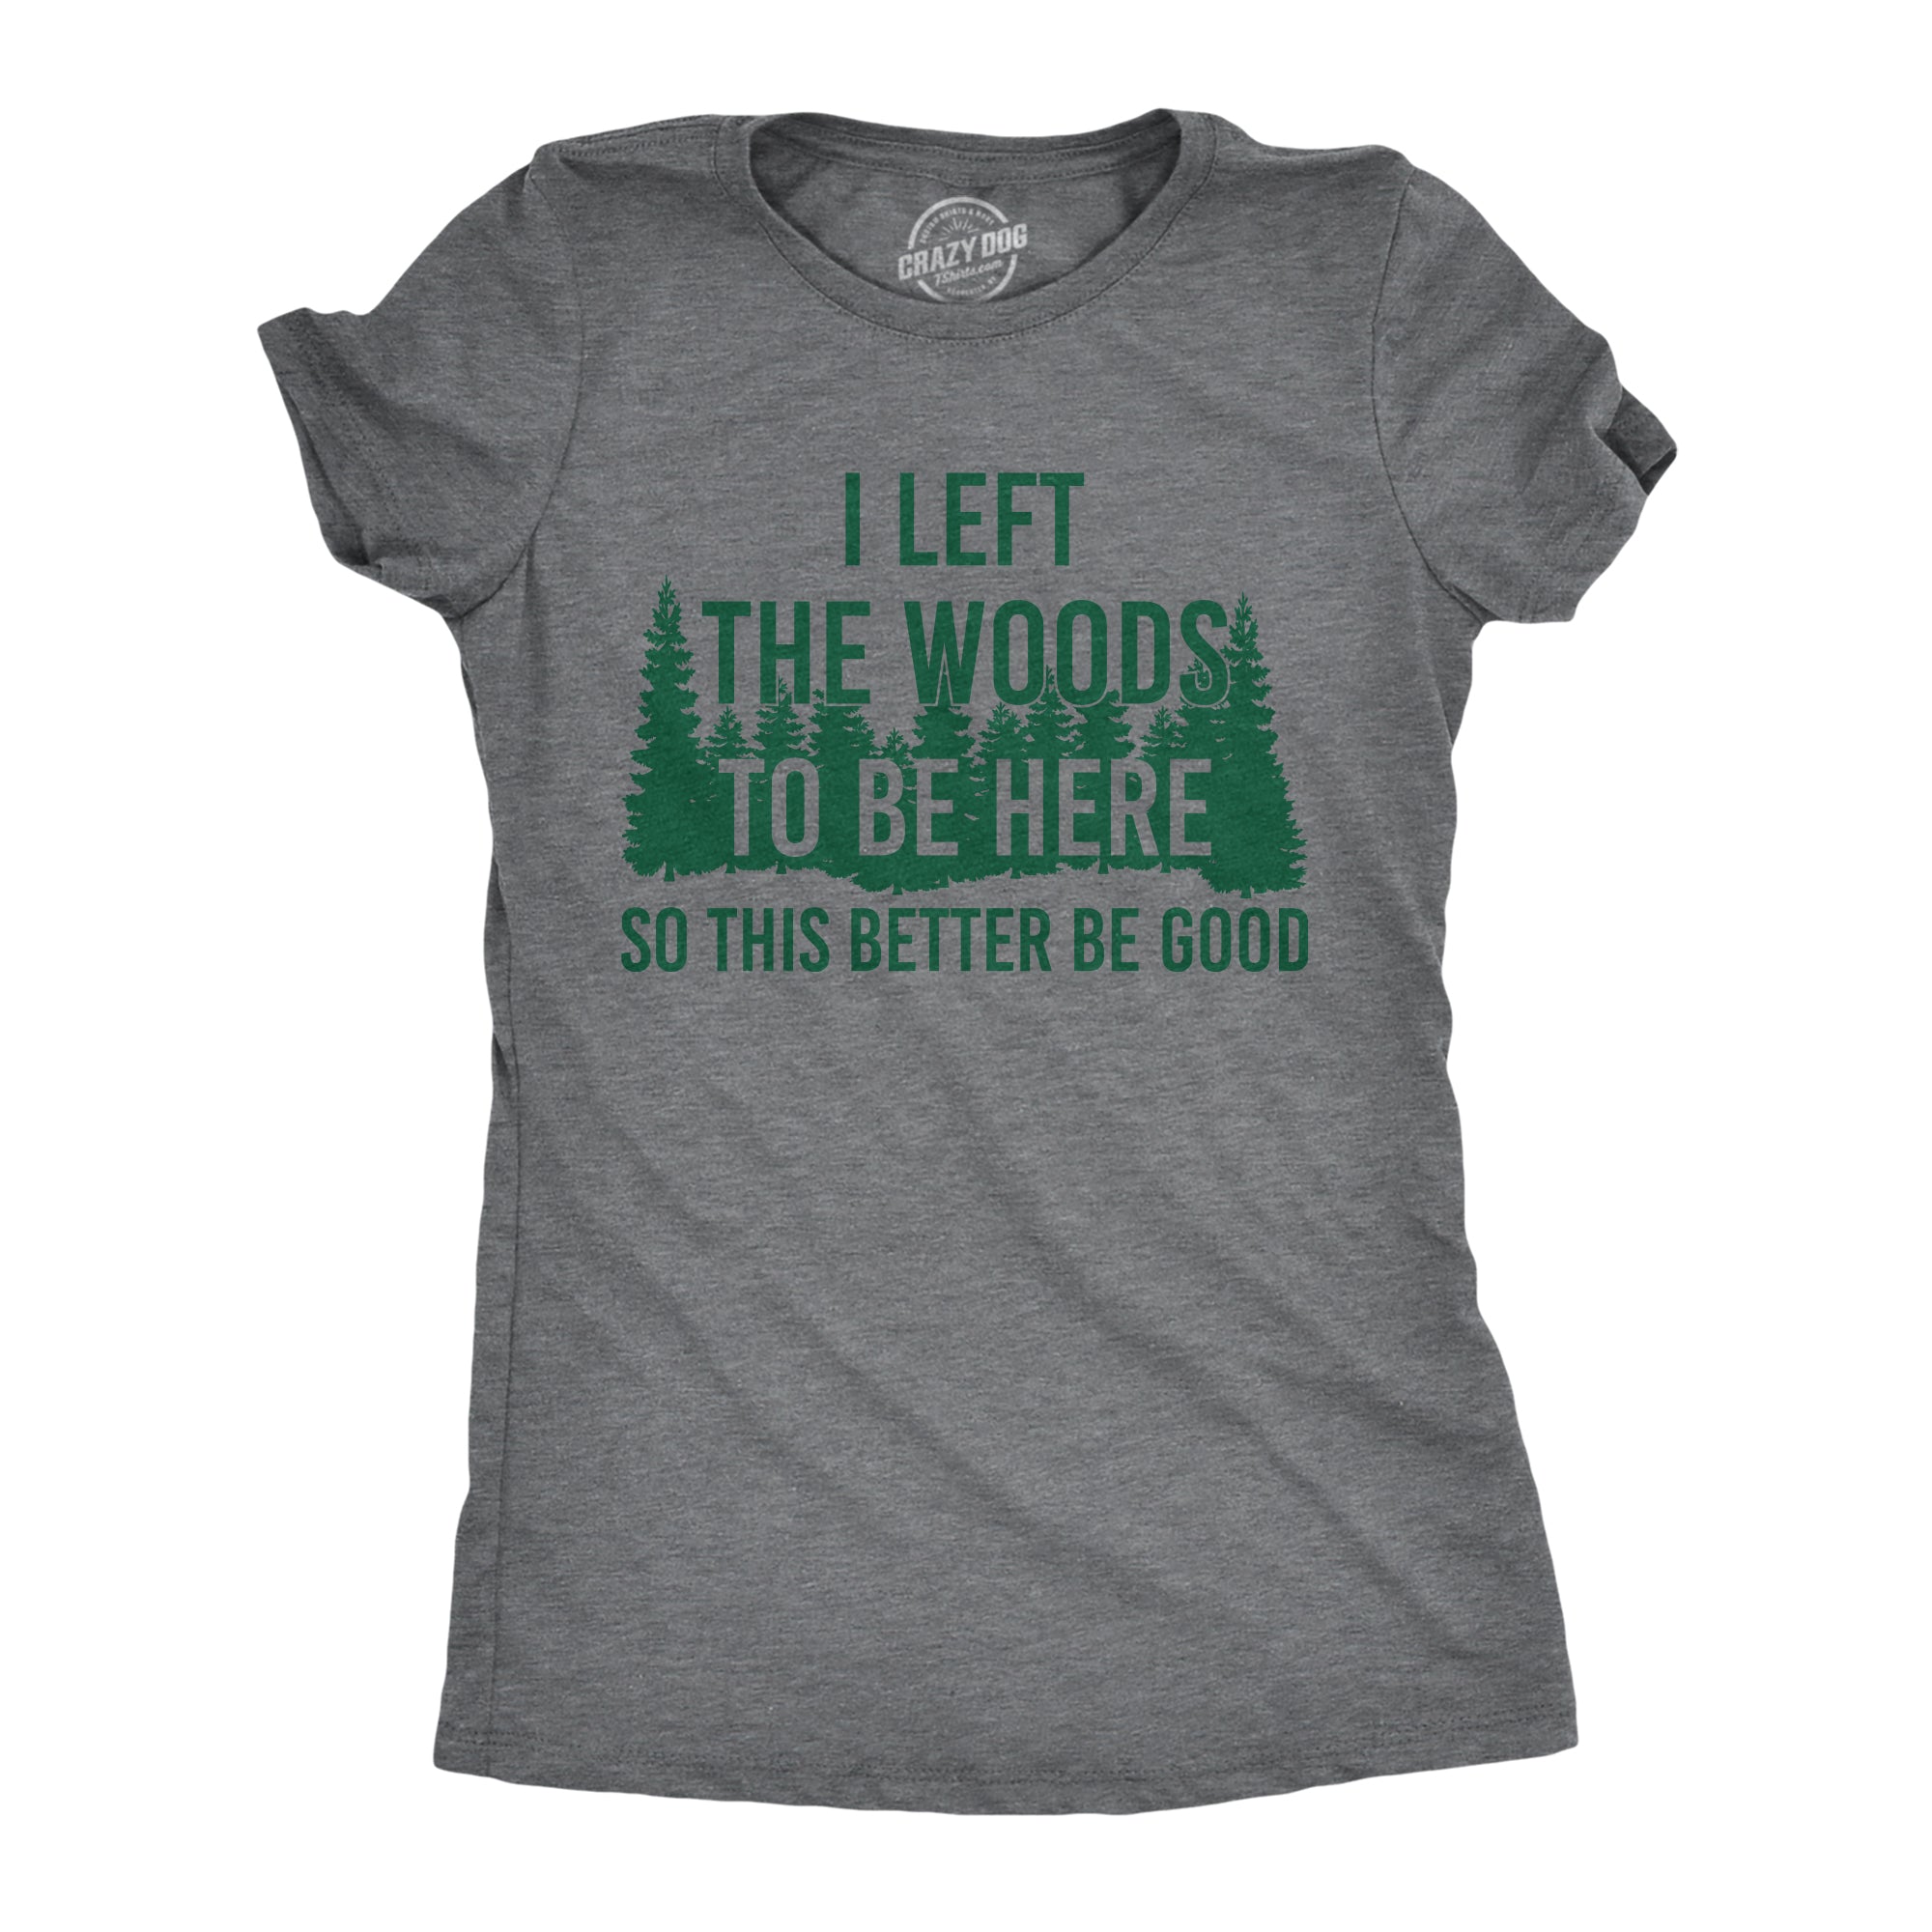 Funny Dark Heather Grey - Left The Woods To Be Here I Left The Woods To Be Here Womens T Shirt Nerdy Camping sarcastic Tee